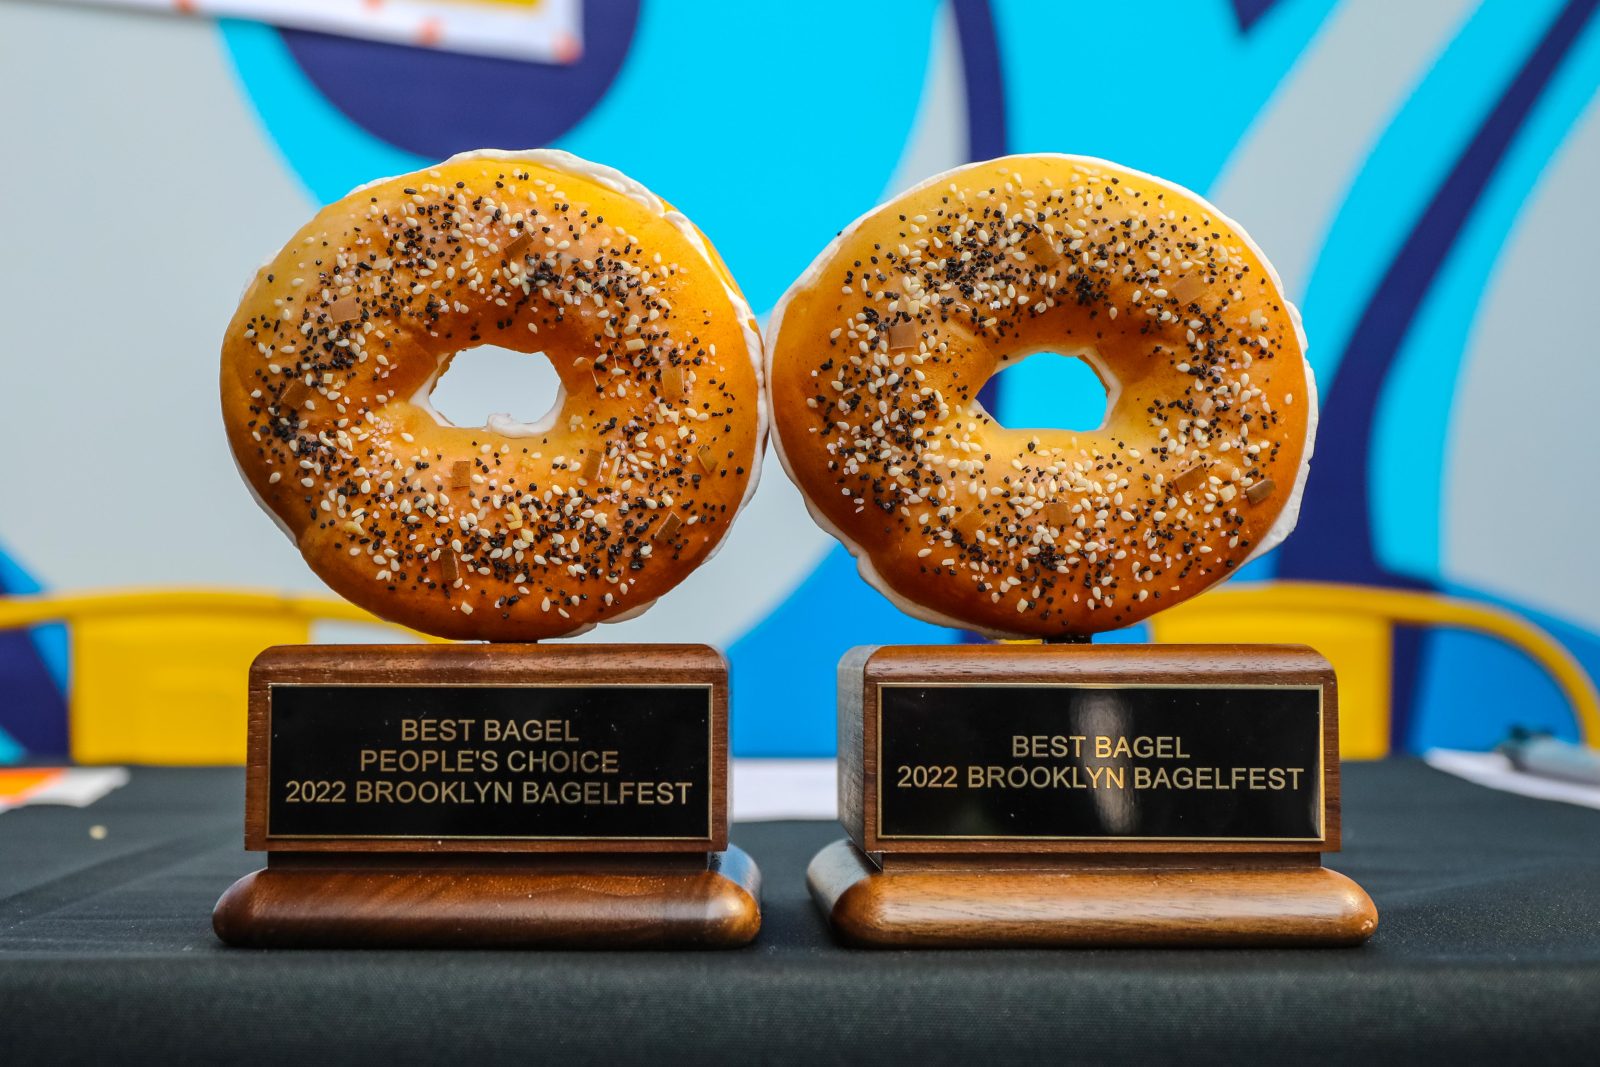 Scenes from BagelFest (where the best bagel In Brooklyn is once again